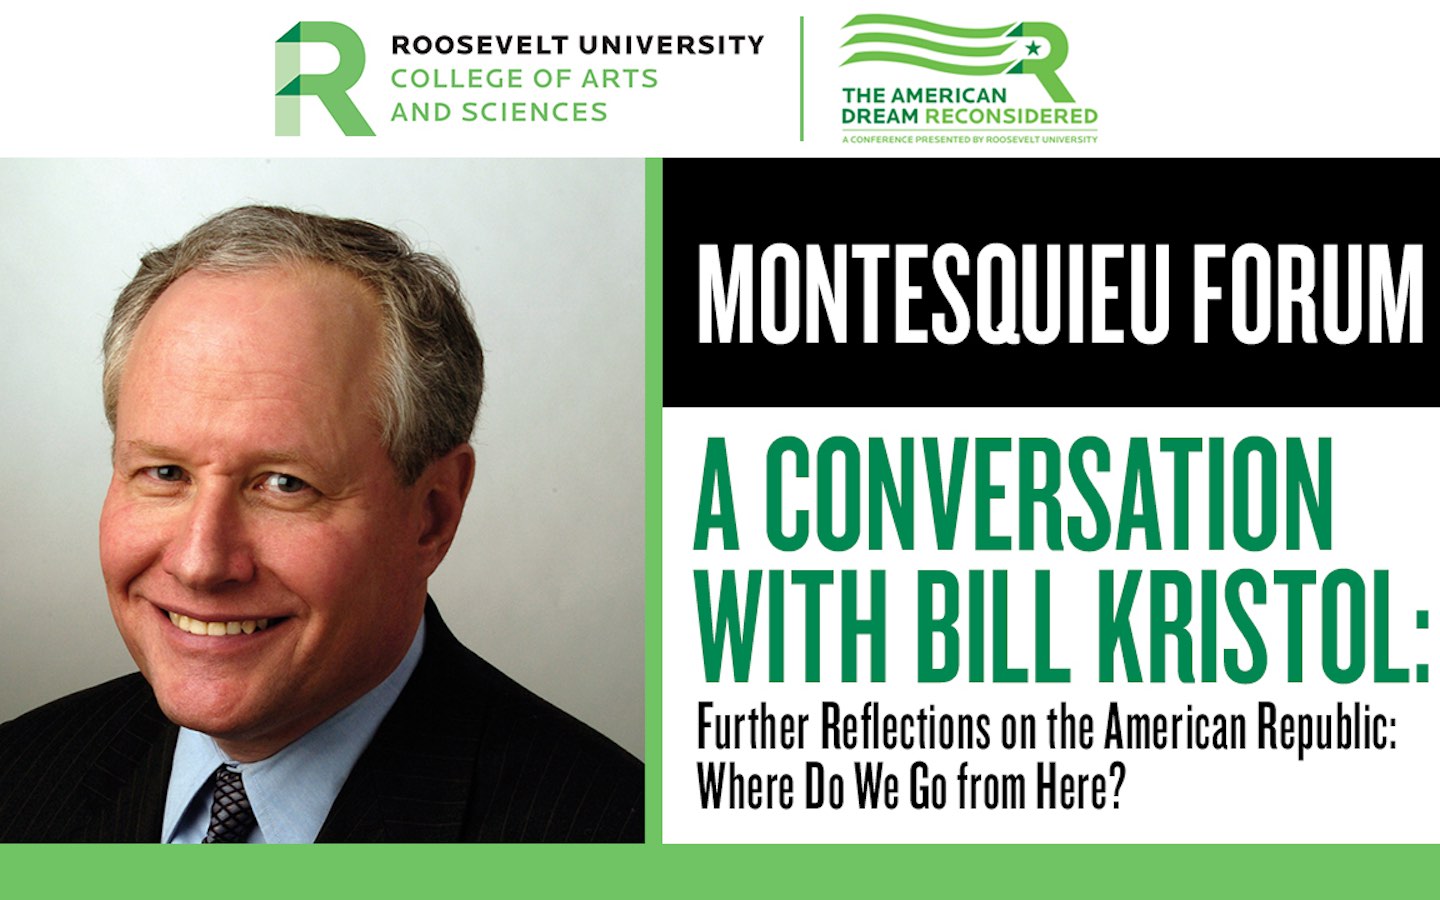 Montesquieu Forum, A Conversation with Bill Kristol, Further Reflections on the American Republic: Where Do We Go From Here?"